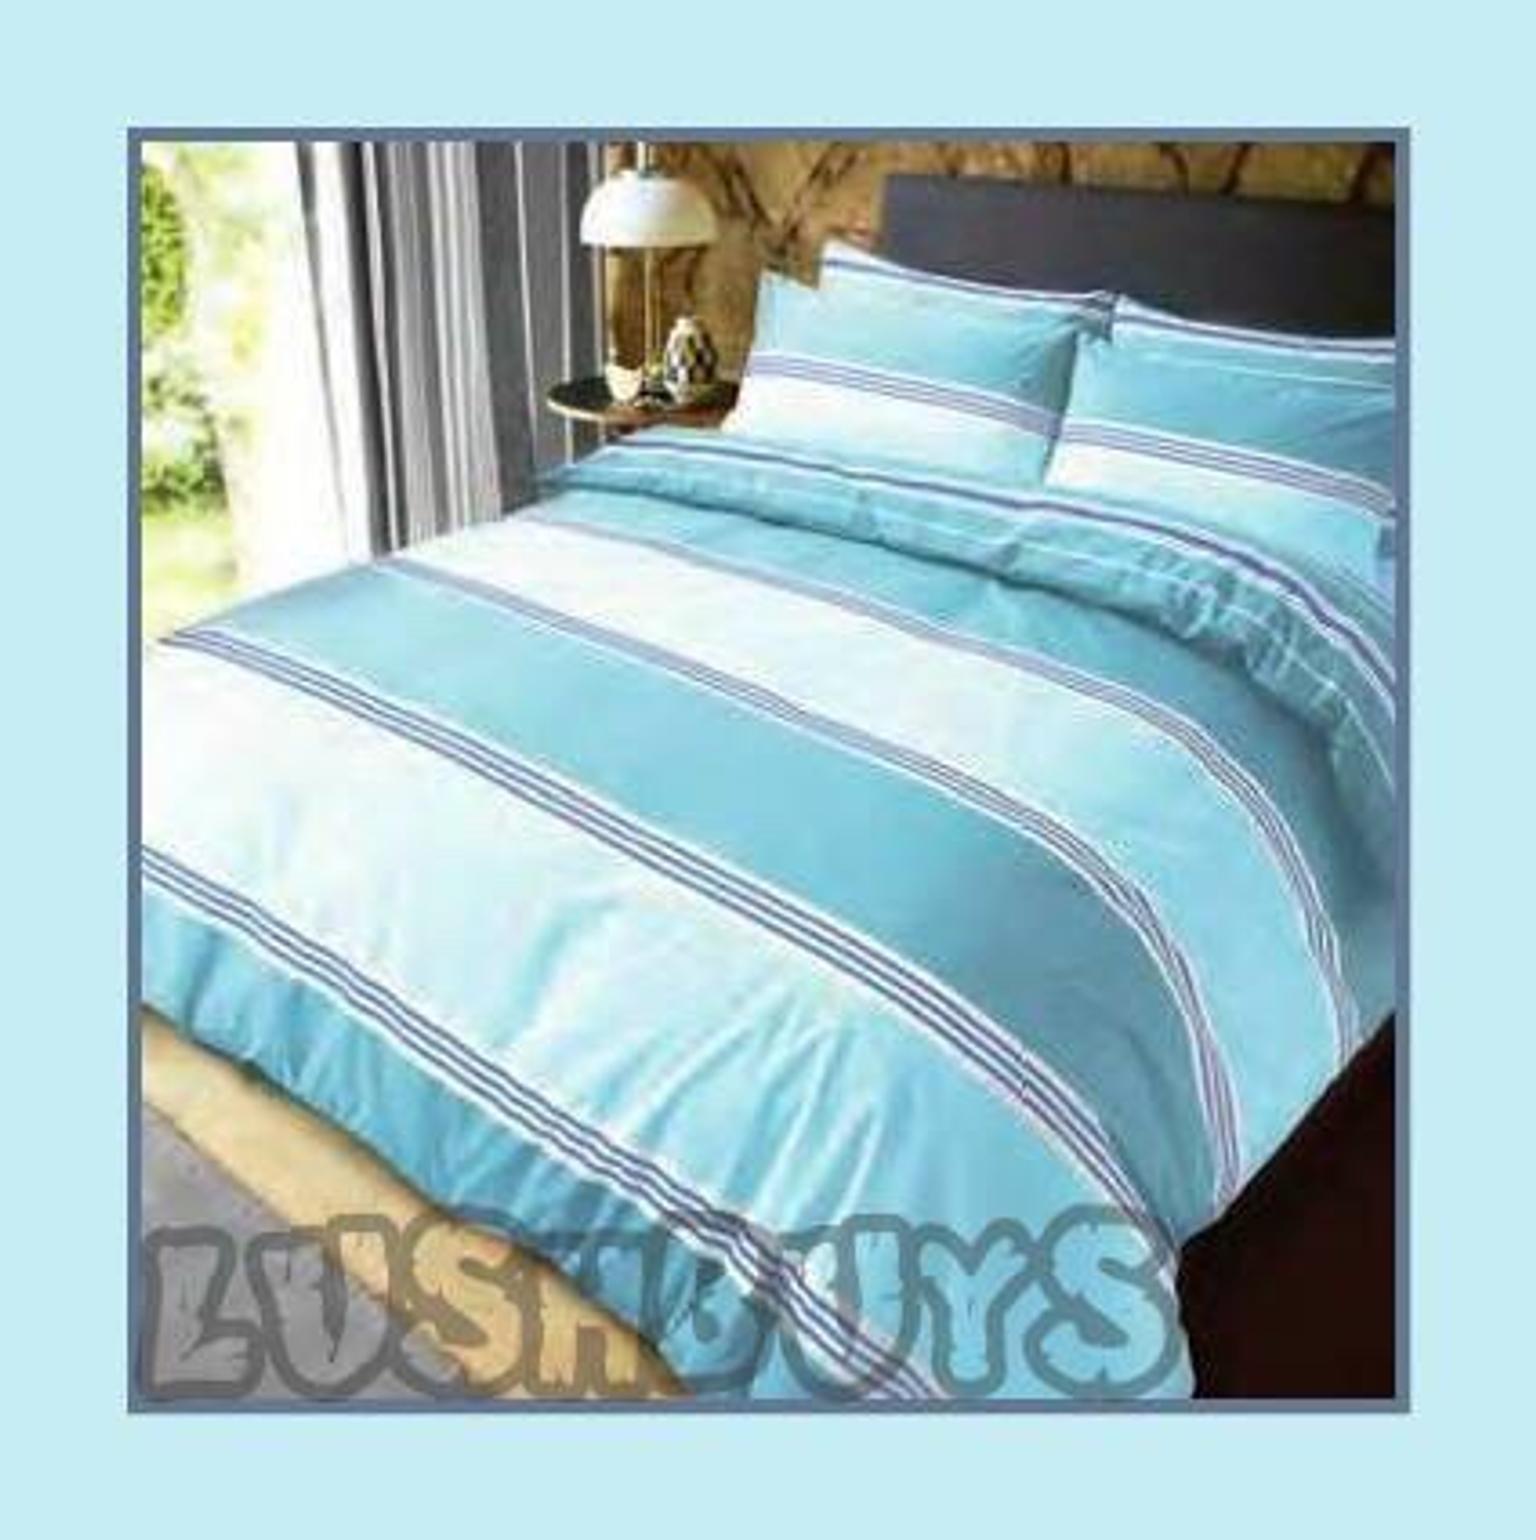 Striped Bedding Brand New In Sp9 Tidworth For 28 00 For Sale Shpock